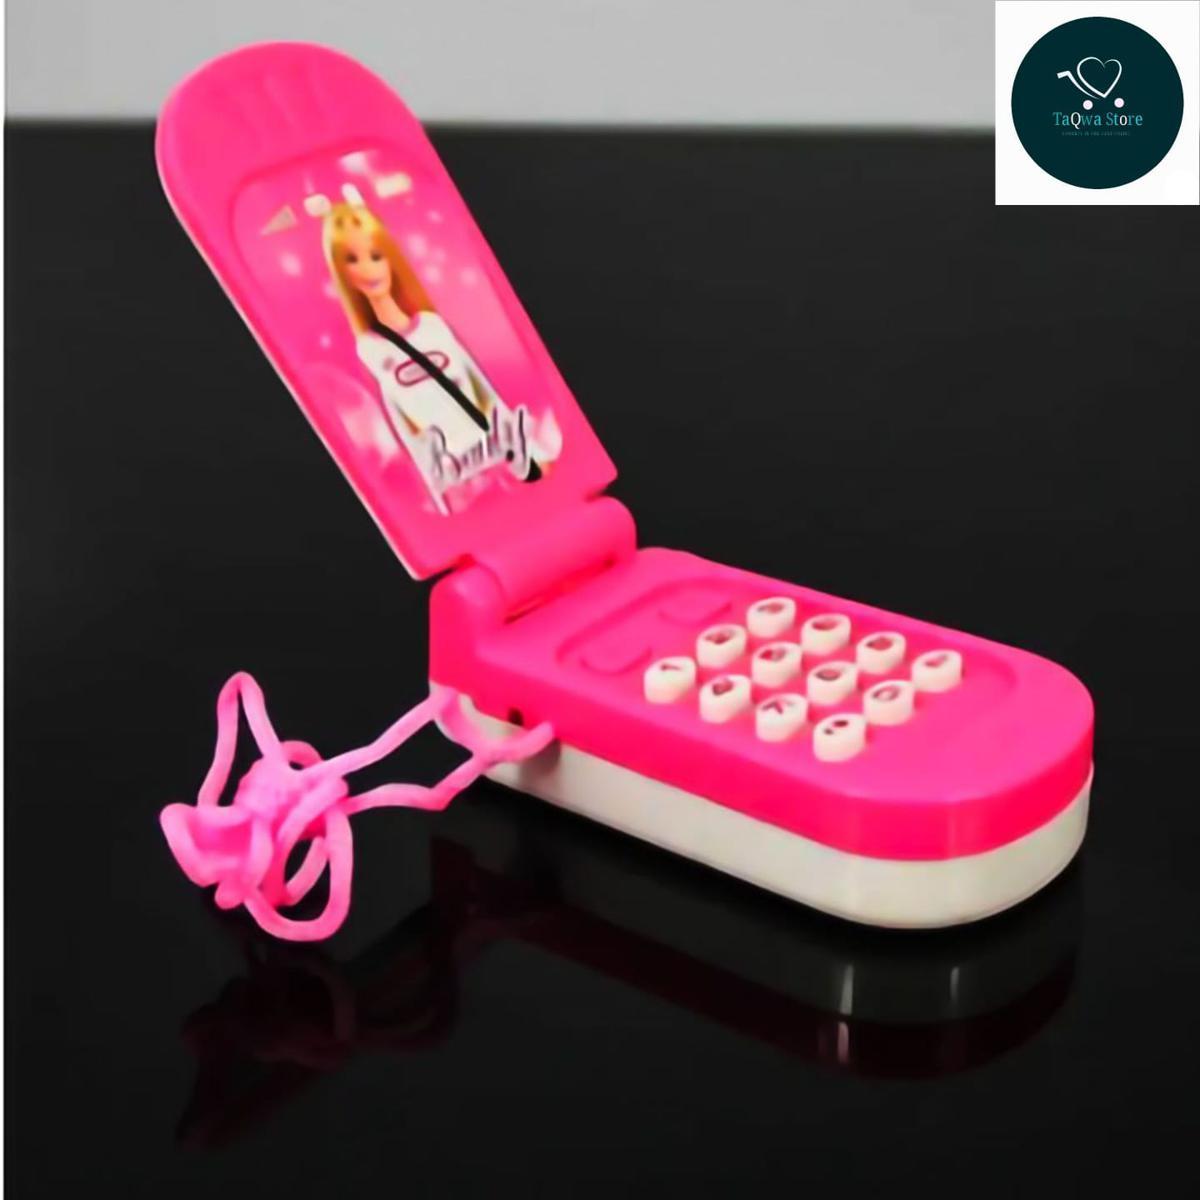 Mini Berbie Toy Phone - Pink (Small Size) With Battery